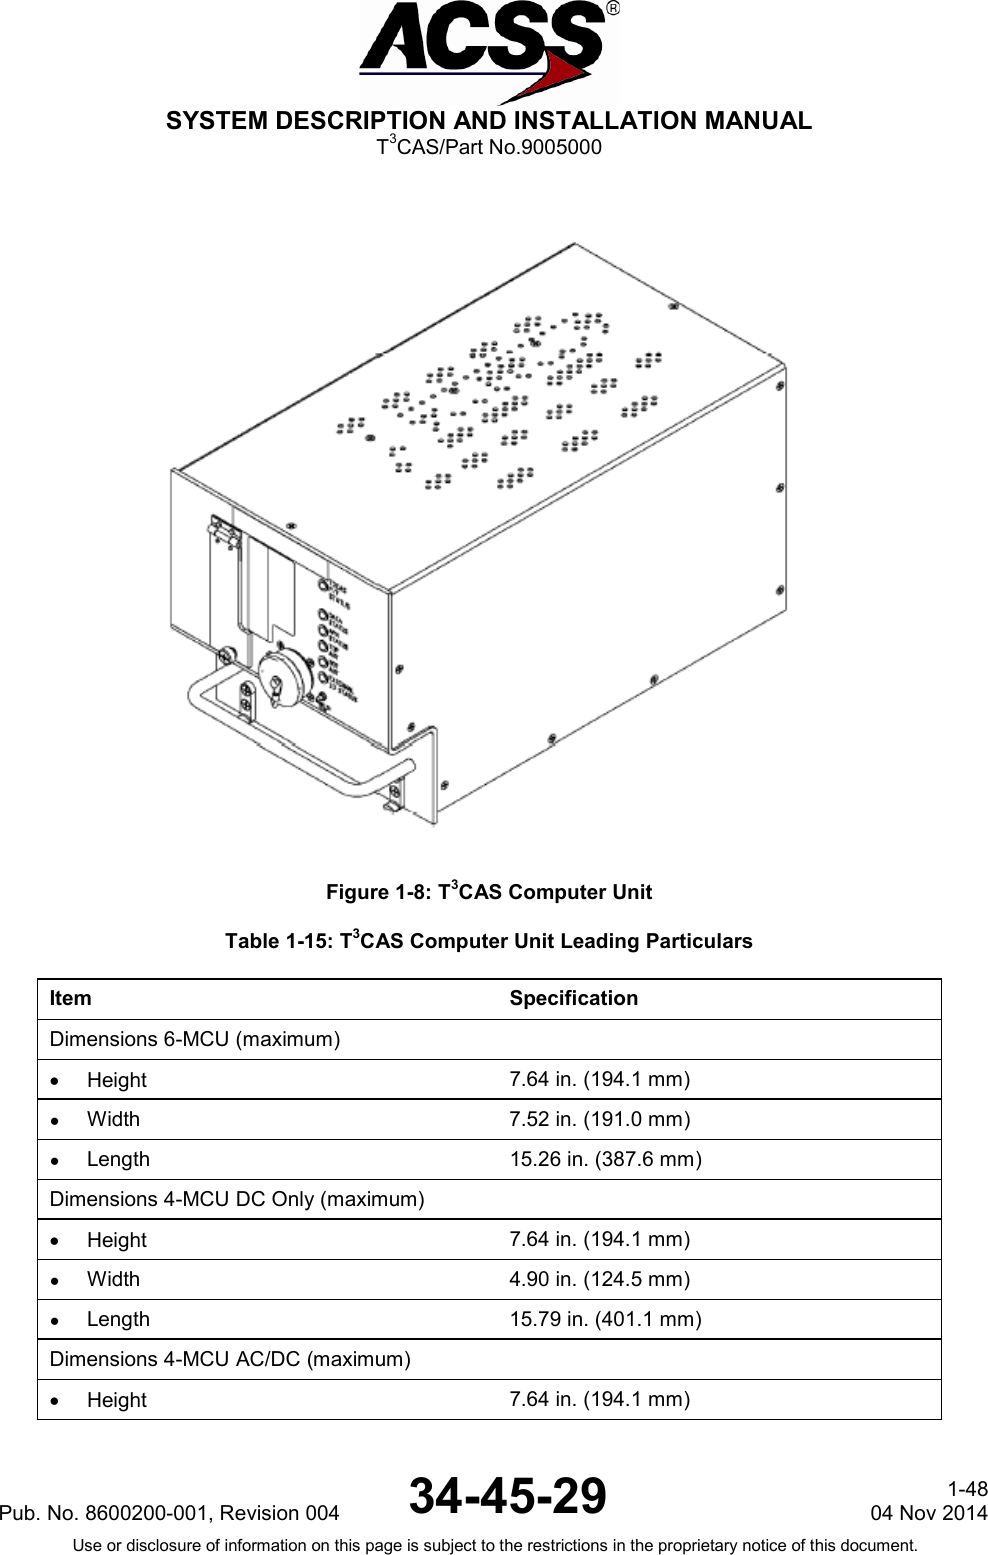  SYSTEM DESCRIPTION AND INSTALLATION MANUAL T3CAS/Part No.9005000  Figure 1-8: T3CAS Computer Unit Table 1-15: T3CAS Computer Unit Leading Particulars Item Specification Dimensions 6-MCU (maximum)   • Height 7.64 in. (194.1 mm) ●  Width 7.52 in. (191.0 mm) ● Length 15.26 in. (387.6 mm) Dimensions 4-MCU DC Only (maximum)   • Height 7.64 in. (194.1 mm) ● Width 4.90 in. (124.5 mm) ●  Length 15.79 in. (401.1 mm) Dimensions 4-MCU AC/DC (maximum)  • Height 7.64 in. (194.1 mm)  Pub. No. 8600200-001, Revision 004 34-45-29 1-48 04 Nov 2014 Use or disclosure of information on this page is subject to the restrictions in the proprietary notice of this document.  